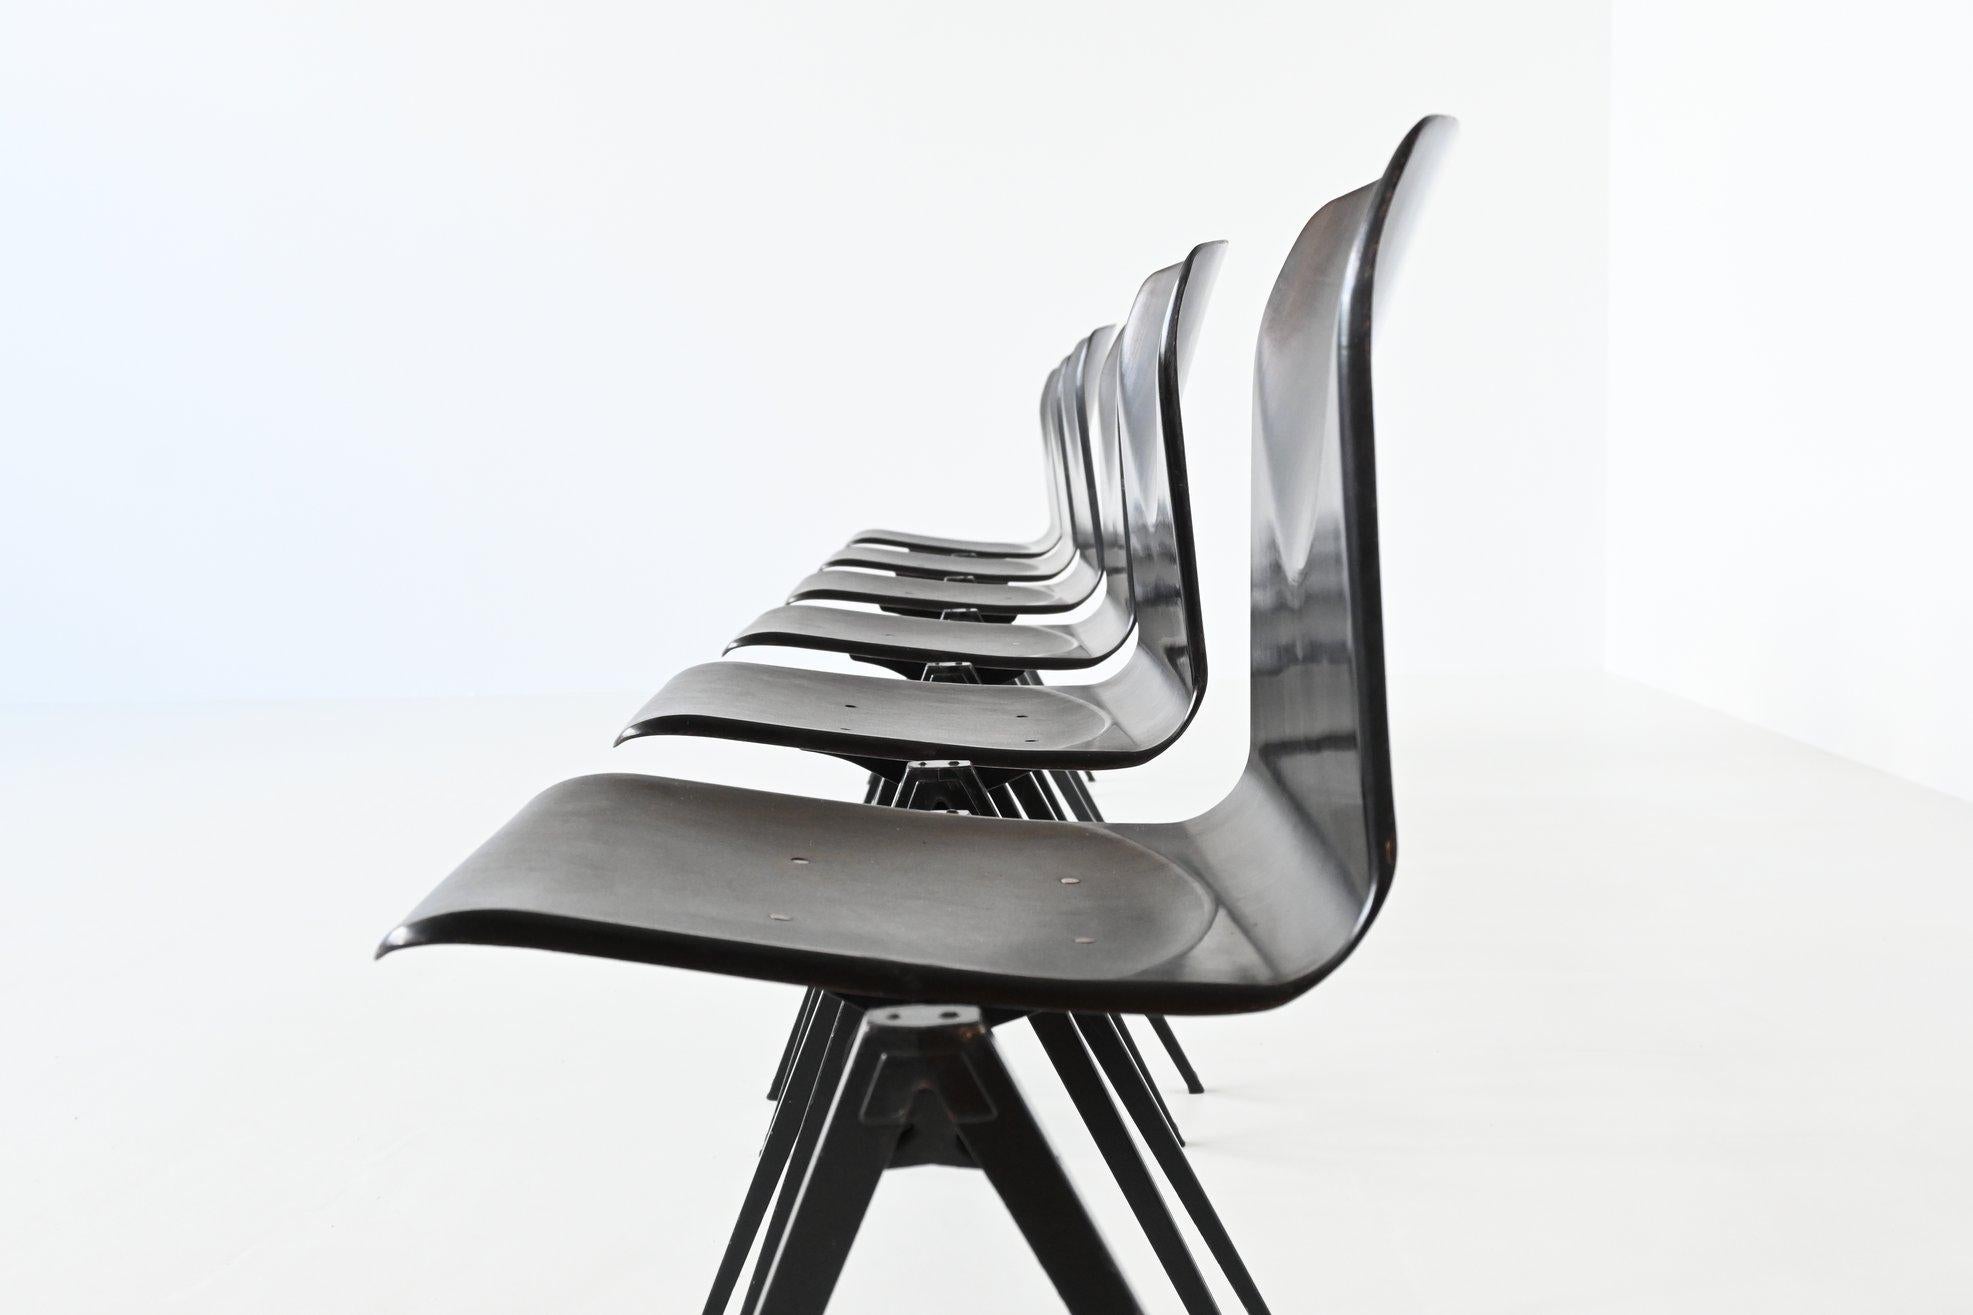 Wood Elmar Flototto Model S22 Black Stacking Chairs Pagholz, Germany, 1970